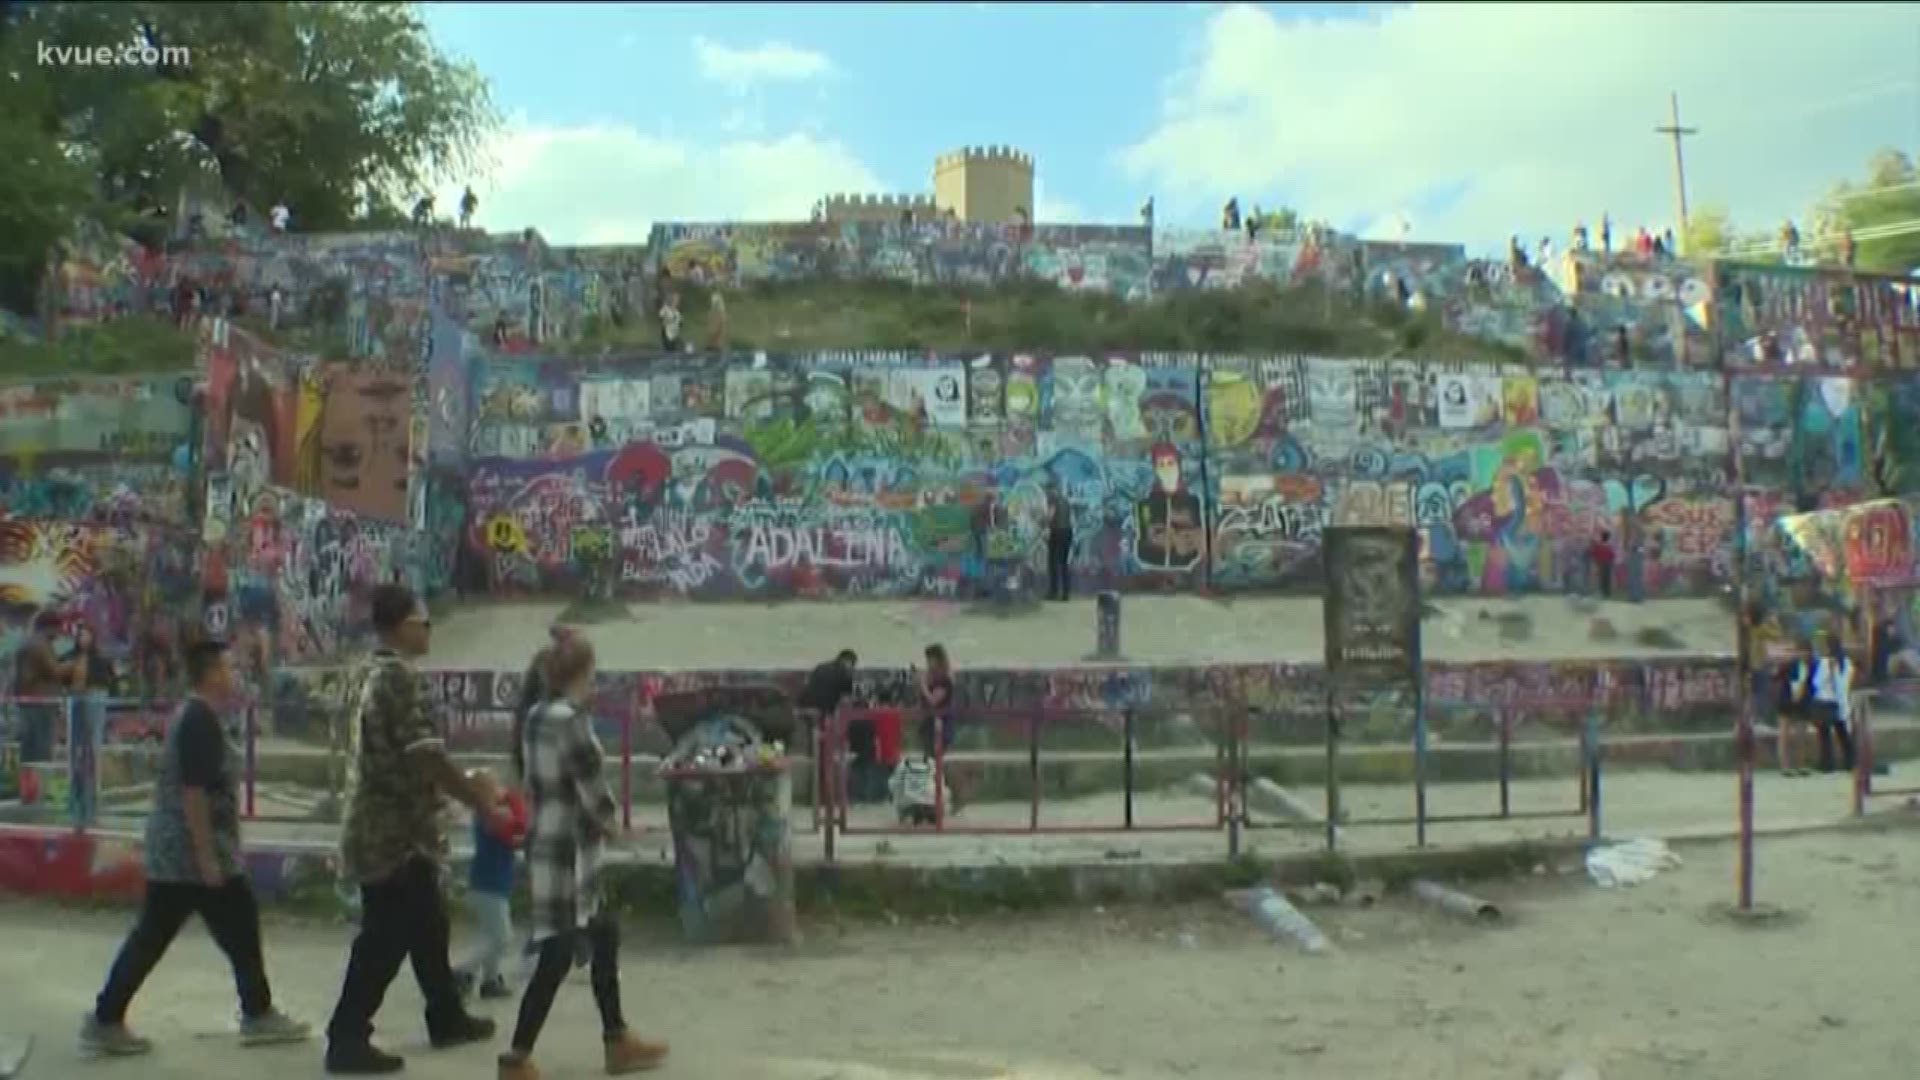 The most colorful place in Austin is moving. The Hope Outdoor Gallery will close at the beginning of the year and will move to Carson Creek Ranch near the airport.
STORY: http://www.kvue.com/news/local/hope-outdoor-gallery-will-close-on-january-2/61560245